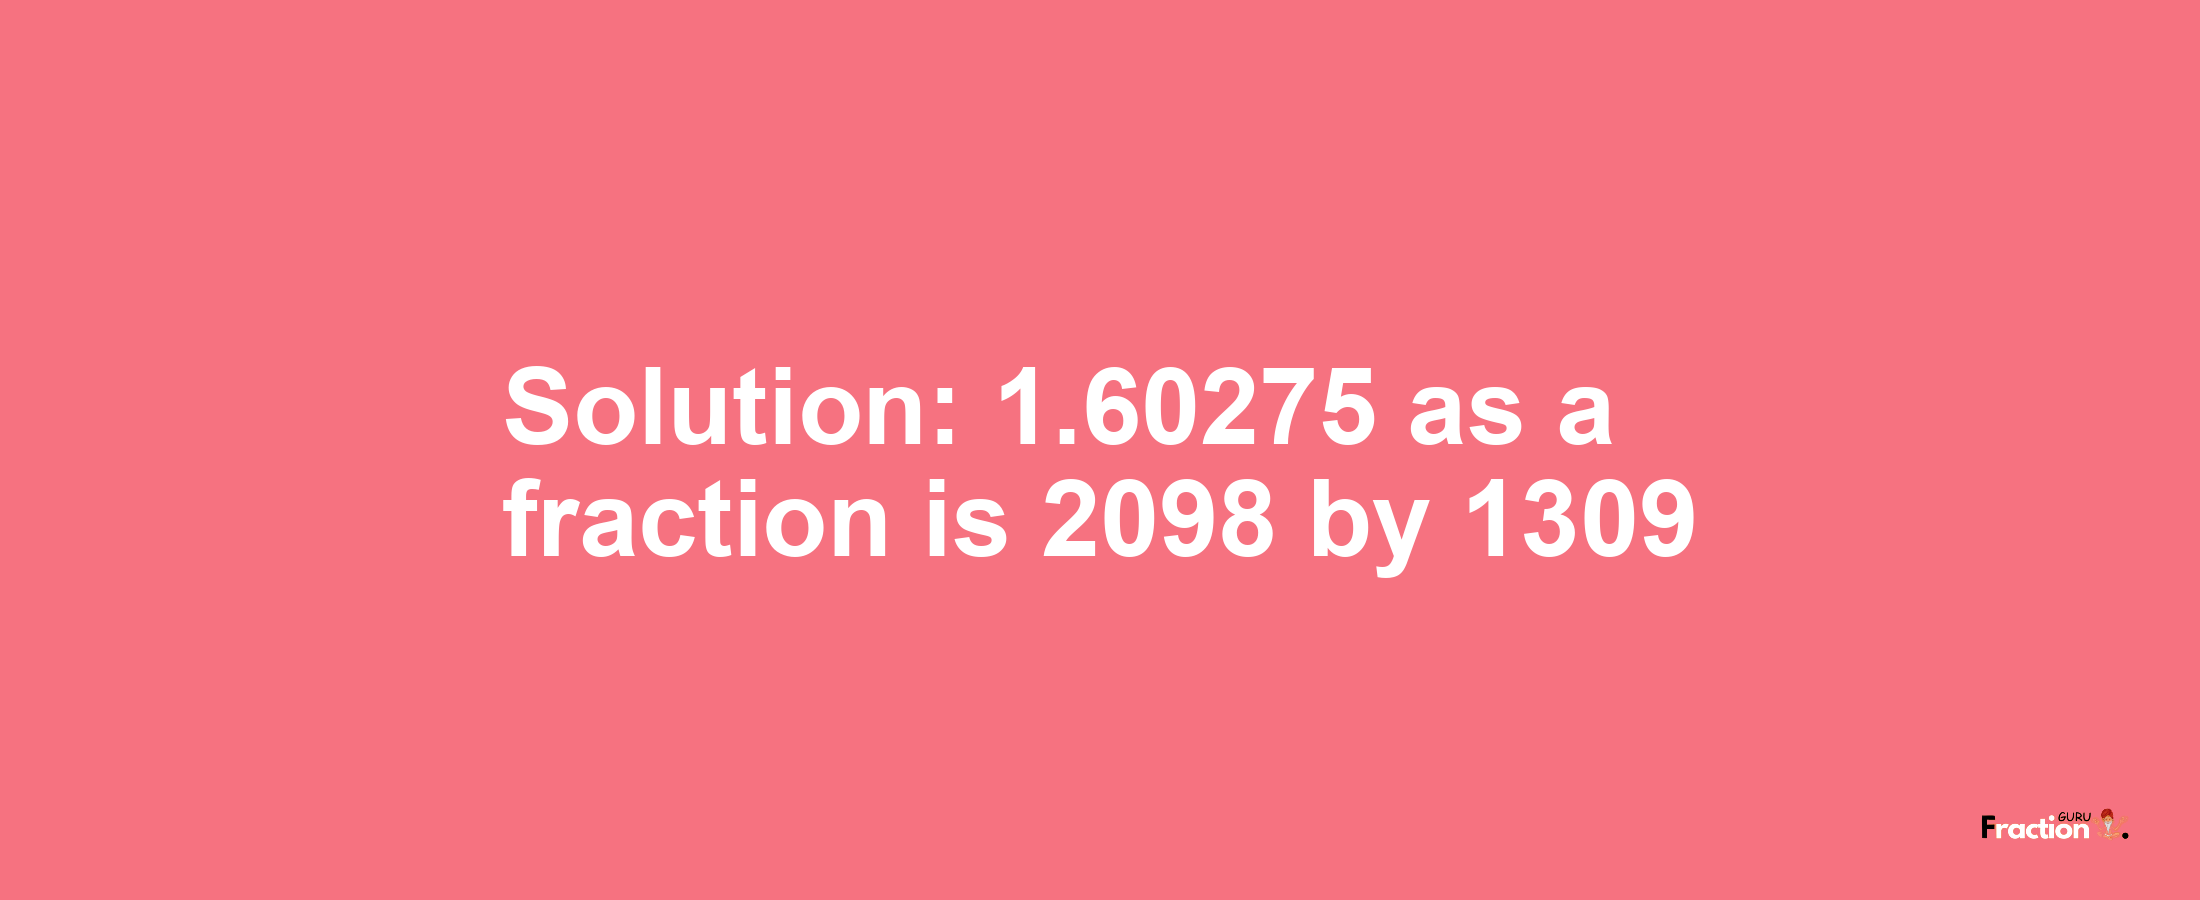 Solution:1.60275 as a fraction is 2098/1309